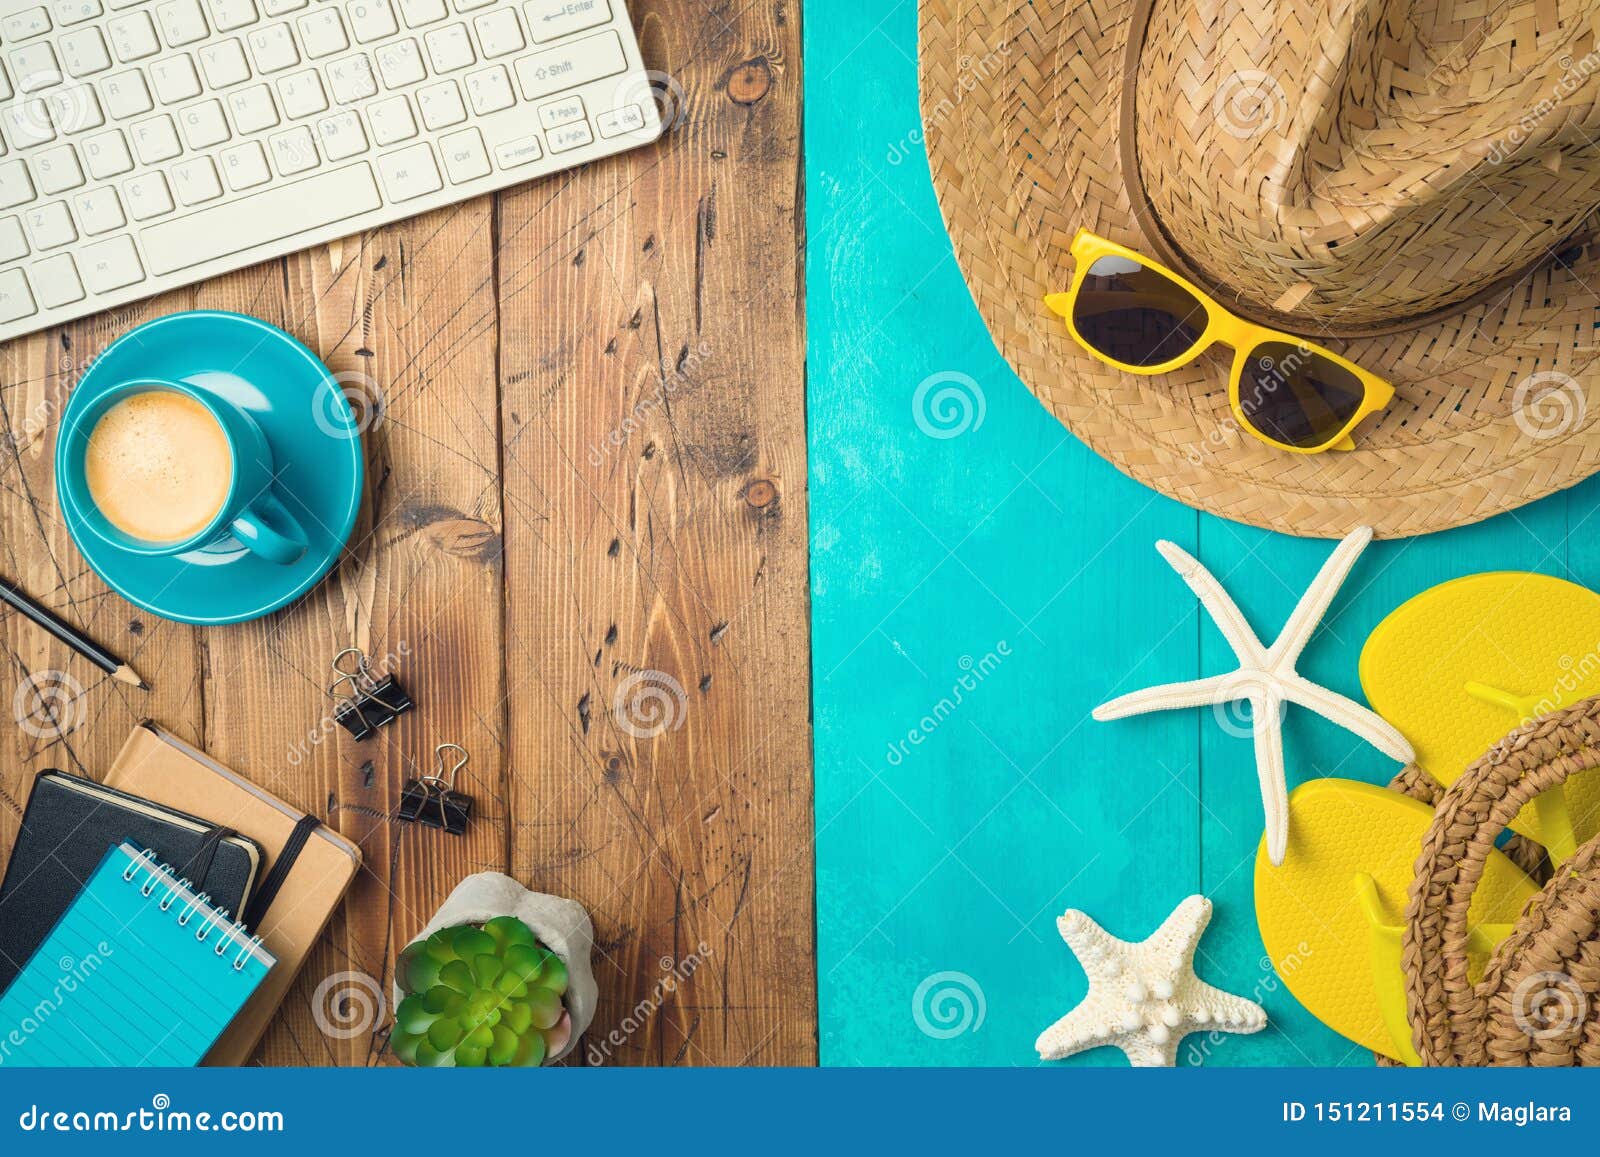 Summer Holiday Vacation Concept With Beach Accessories And Office